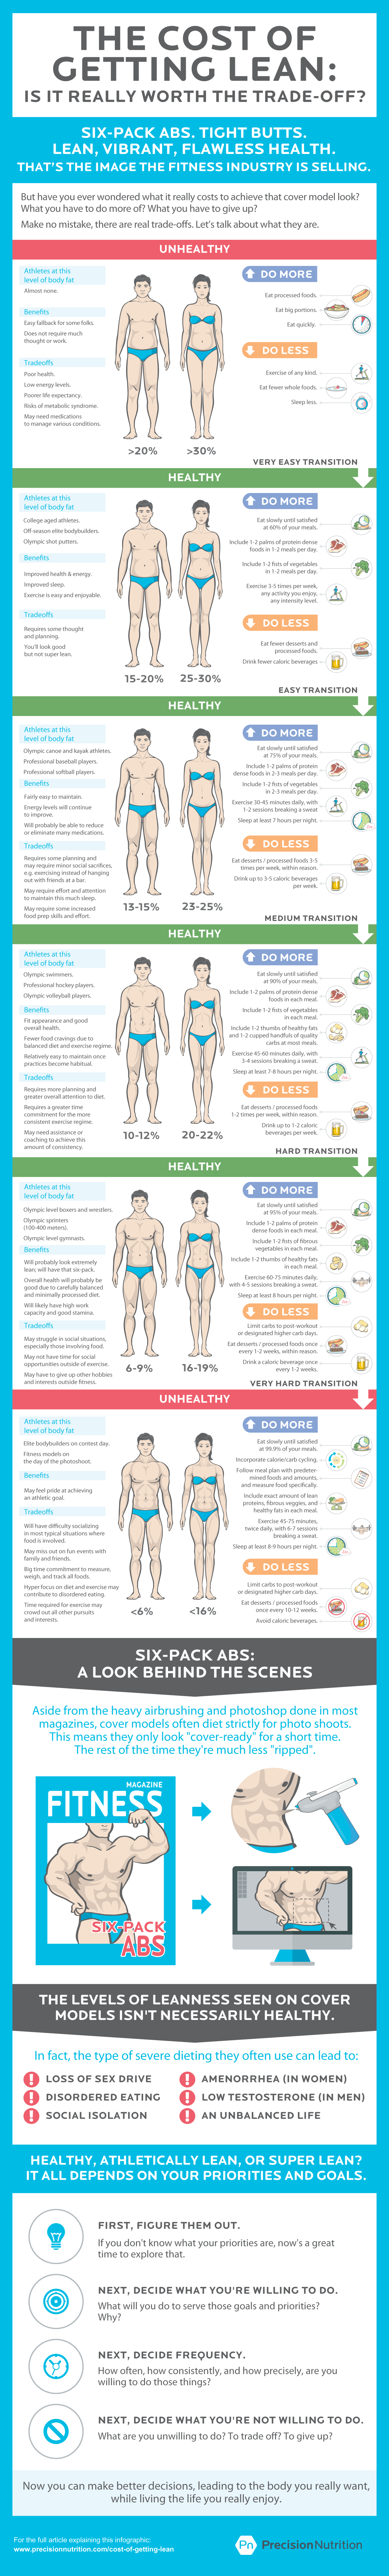 precision-nutrition-cost-of-getting-lean-infographic